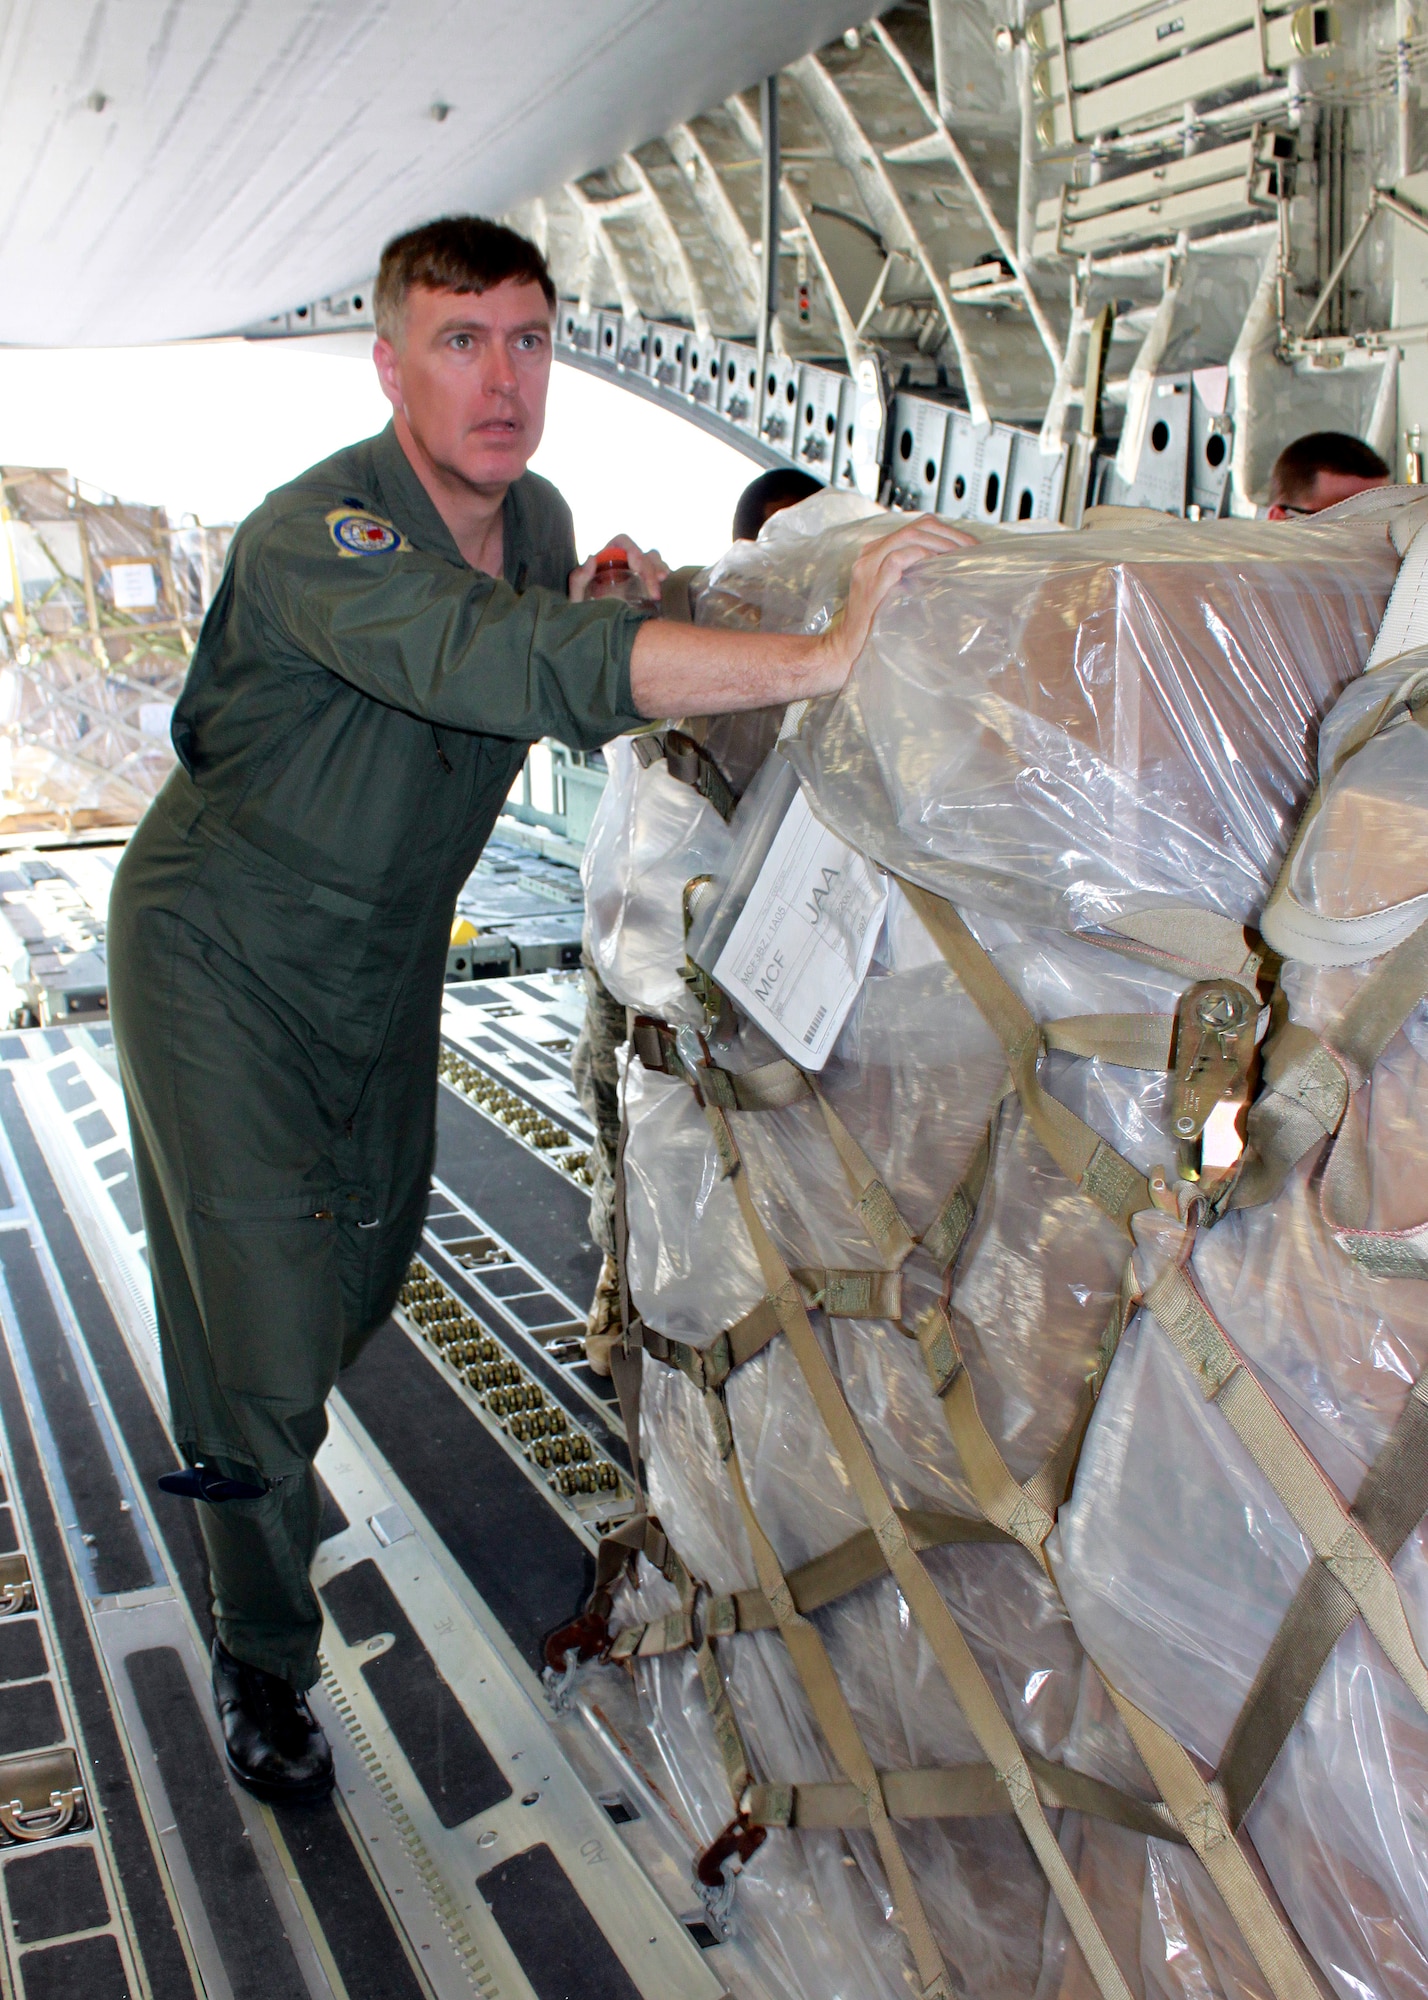 JOINT BASE MCGUIRE-DIX-LAKEHURST ? Lt. Col. Peter Debusmann, 732nd Airlift Squadron pilot, helps the aircrew push cargo palettes into place aboard the C-17 Globemaster III.  The C-17 aircrew accomplished training requirements with stops at three bases over the weekend to upload and download cargo under the Denton Program intended for delivery to Guyana and Afghanistan. The Denton Program authorizes the Department of Defense to transport donated assistance material, free of charge, on a Space Available basis and of no cost to the government other than the cost of transportation itself.